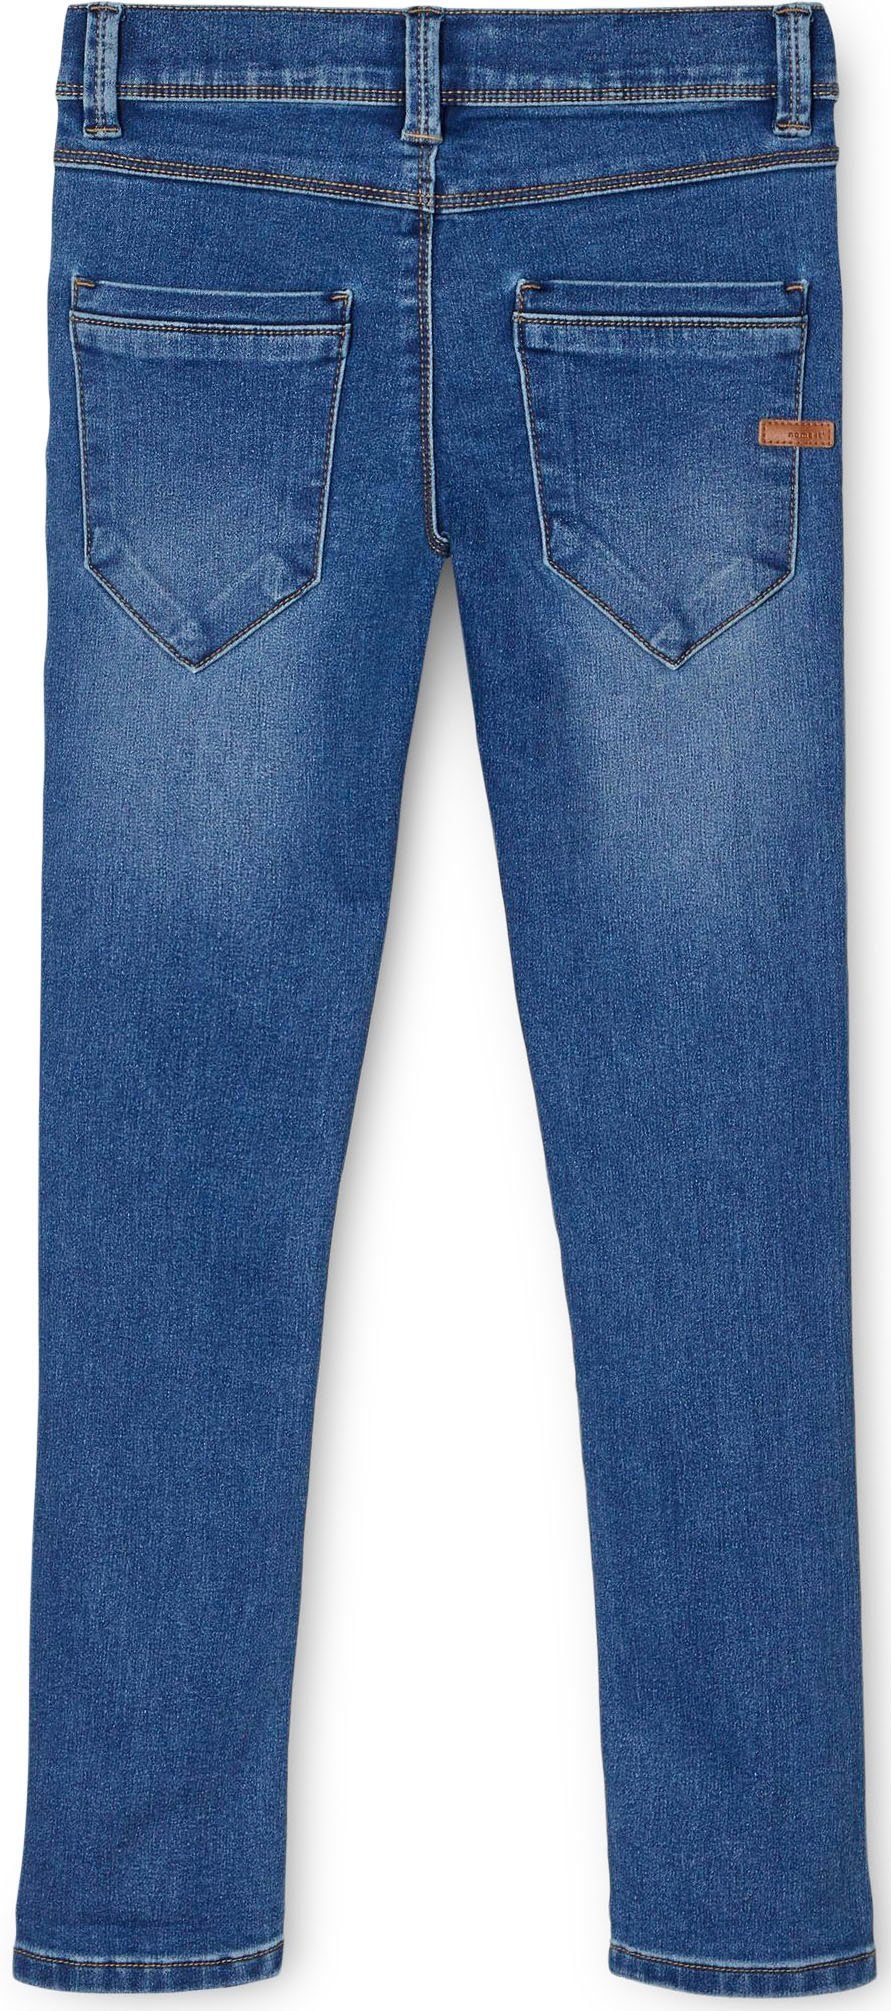 NKMSILAS Name Blau PANT It Stretch-Jeans DNMTAX